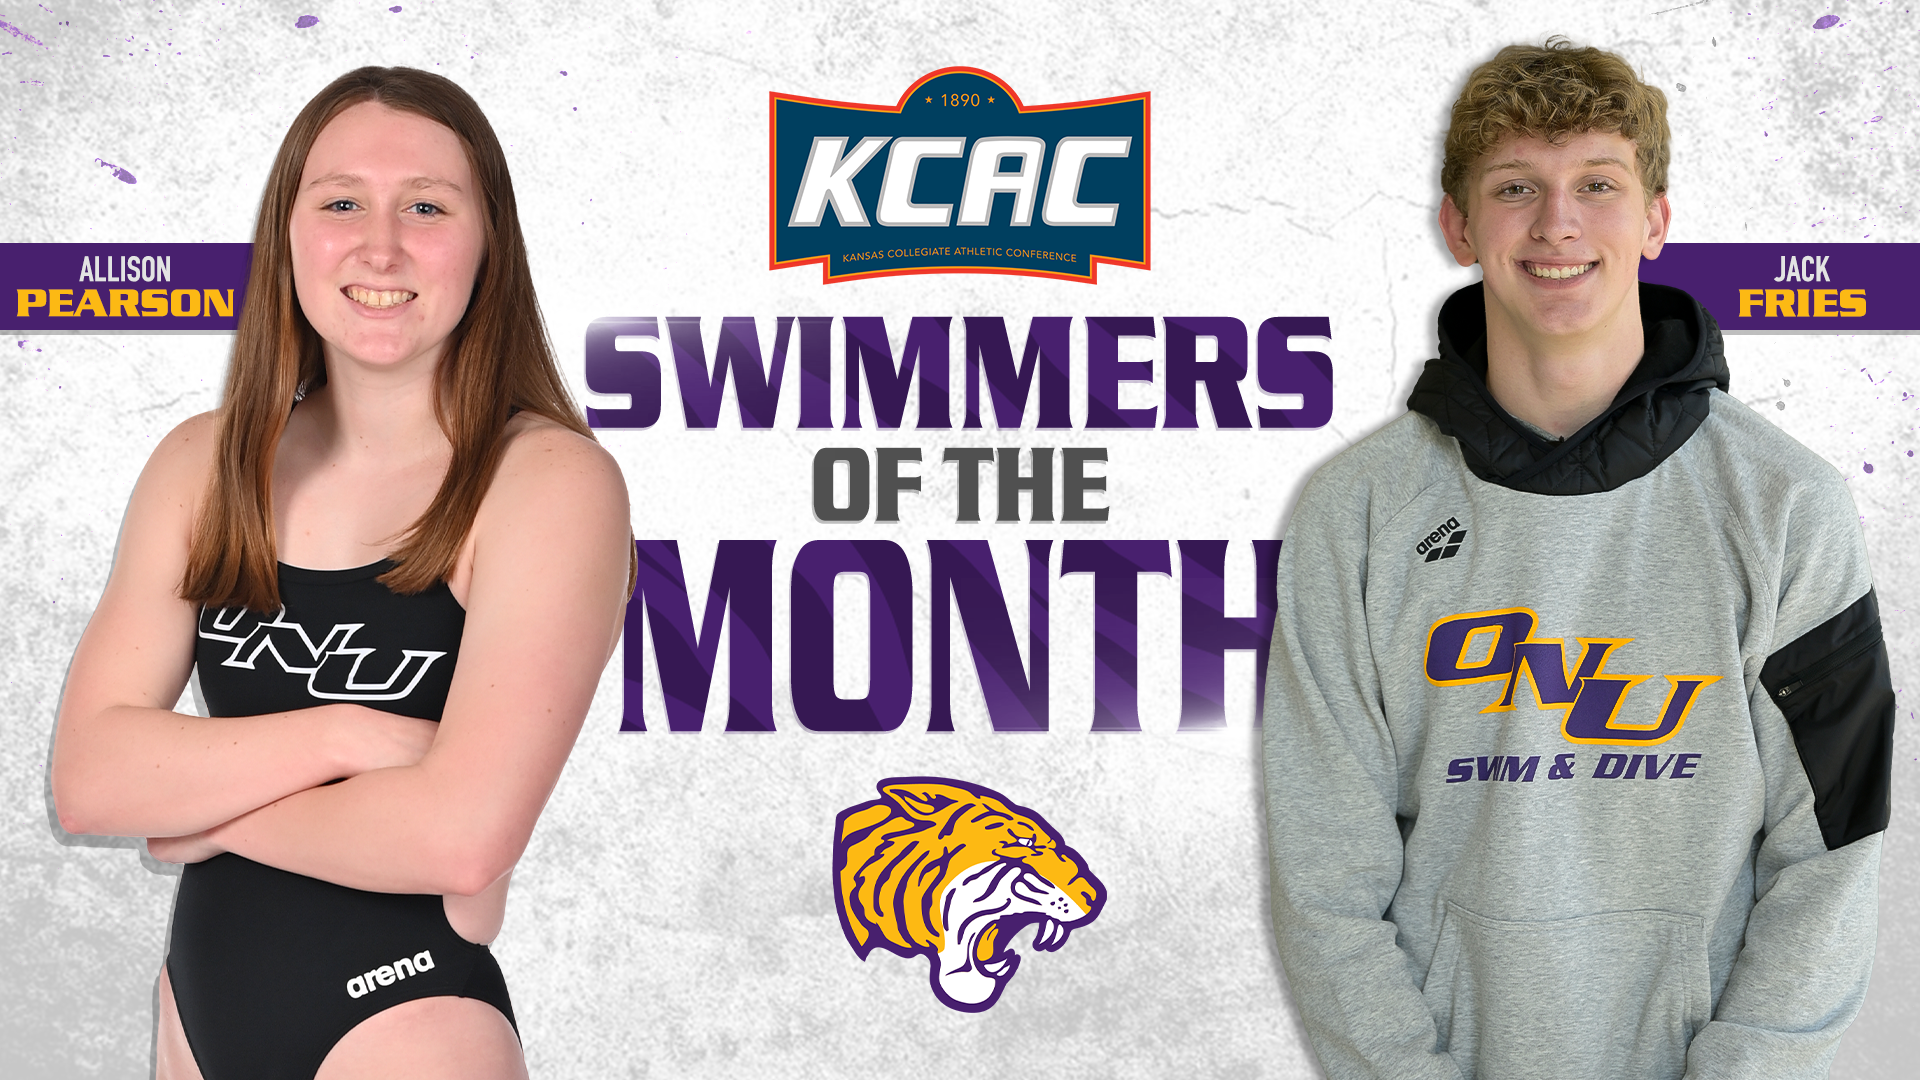 ONU SWEEPS KCAC SWIMMER OF THE MONTH HONORS